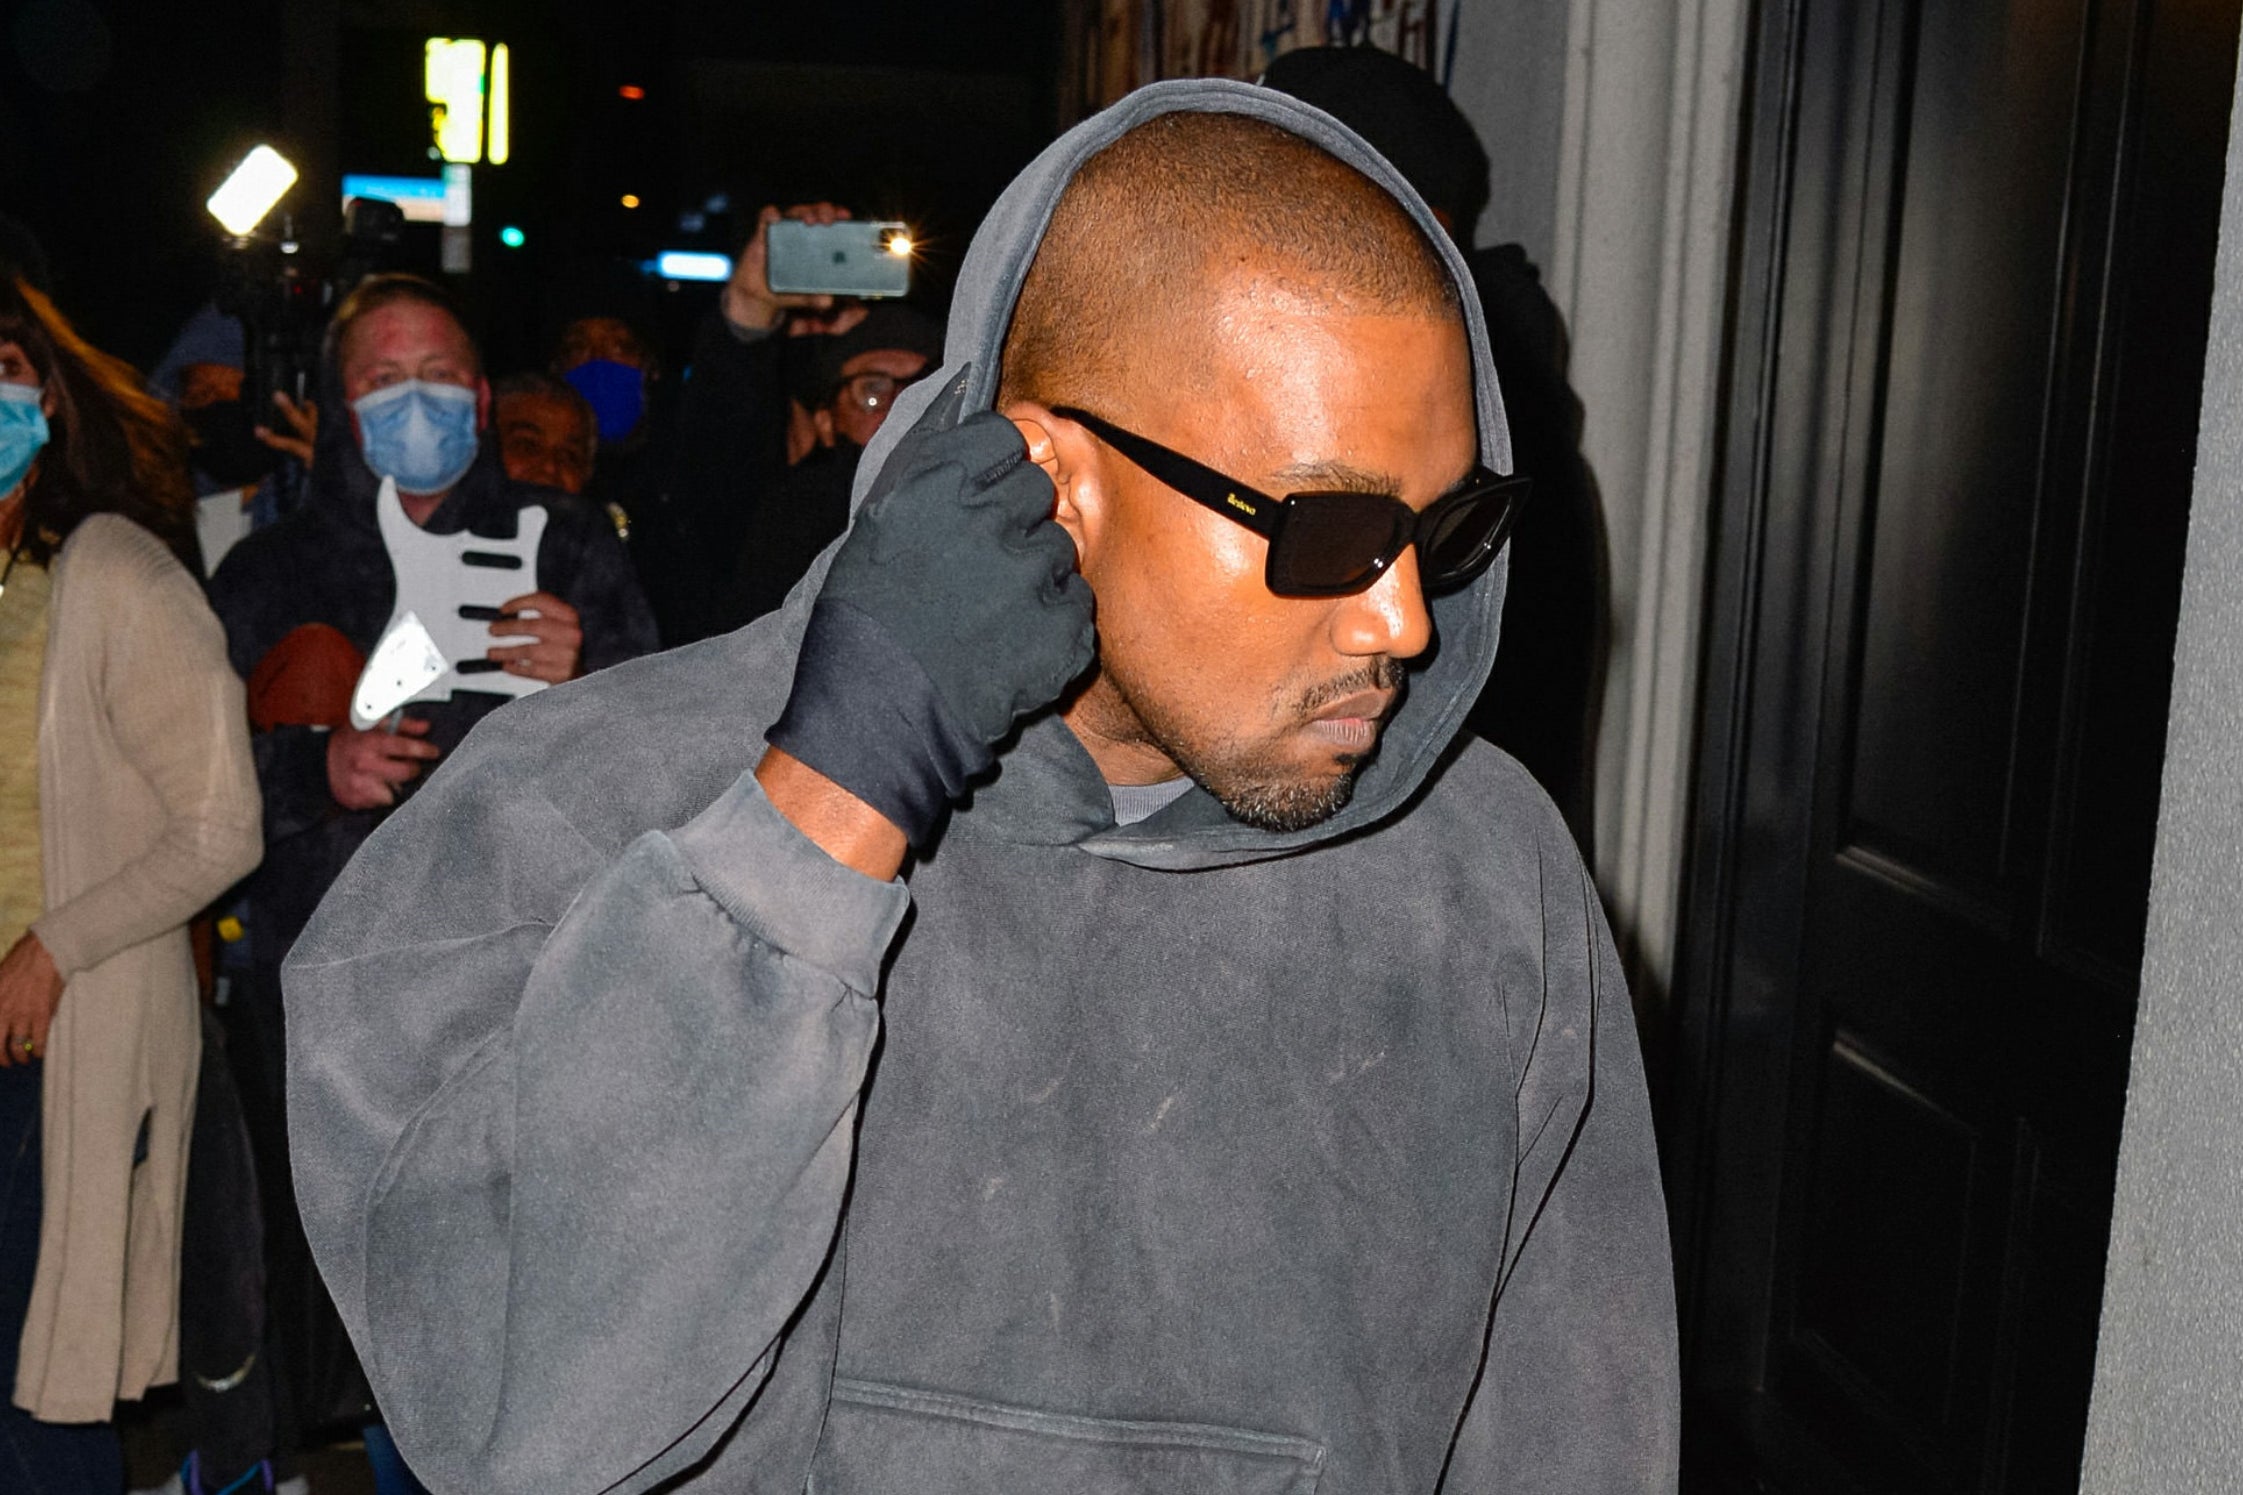 A photo of Kanye West, walking into a restaurant at night, wearing sunglasses, gloves and a hooded sweatshirt.